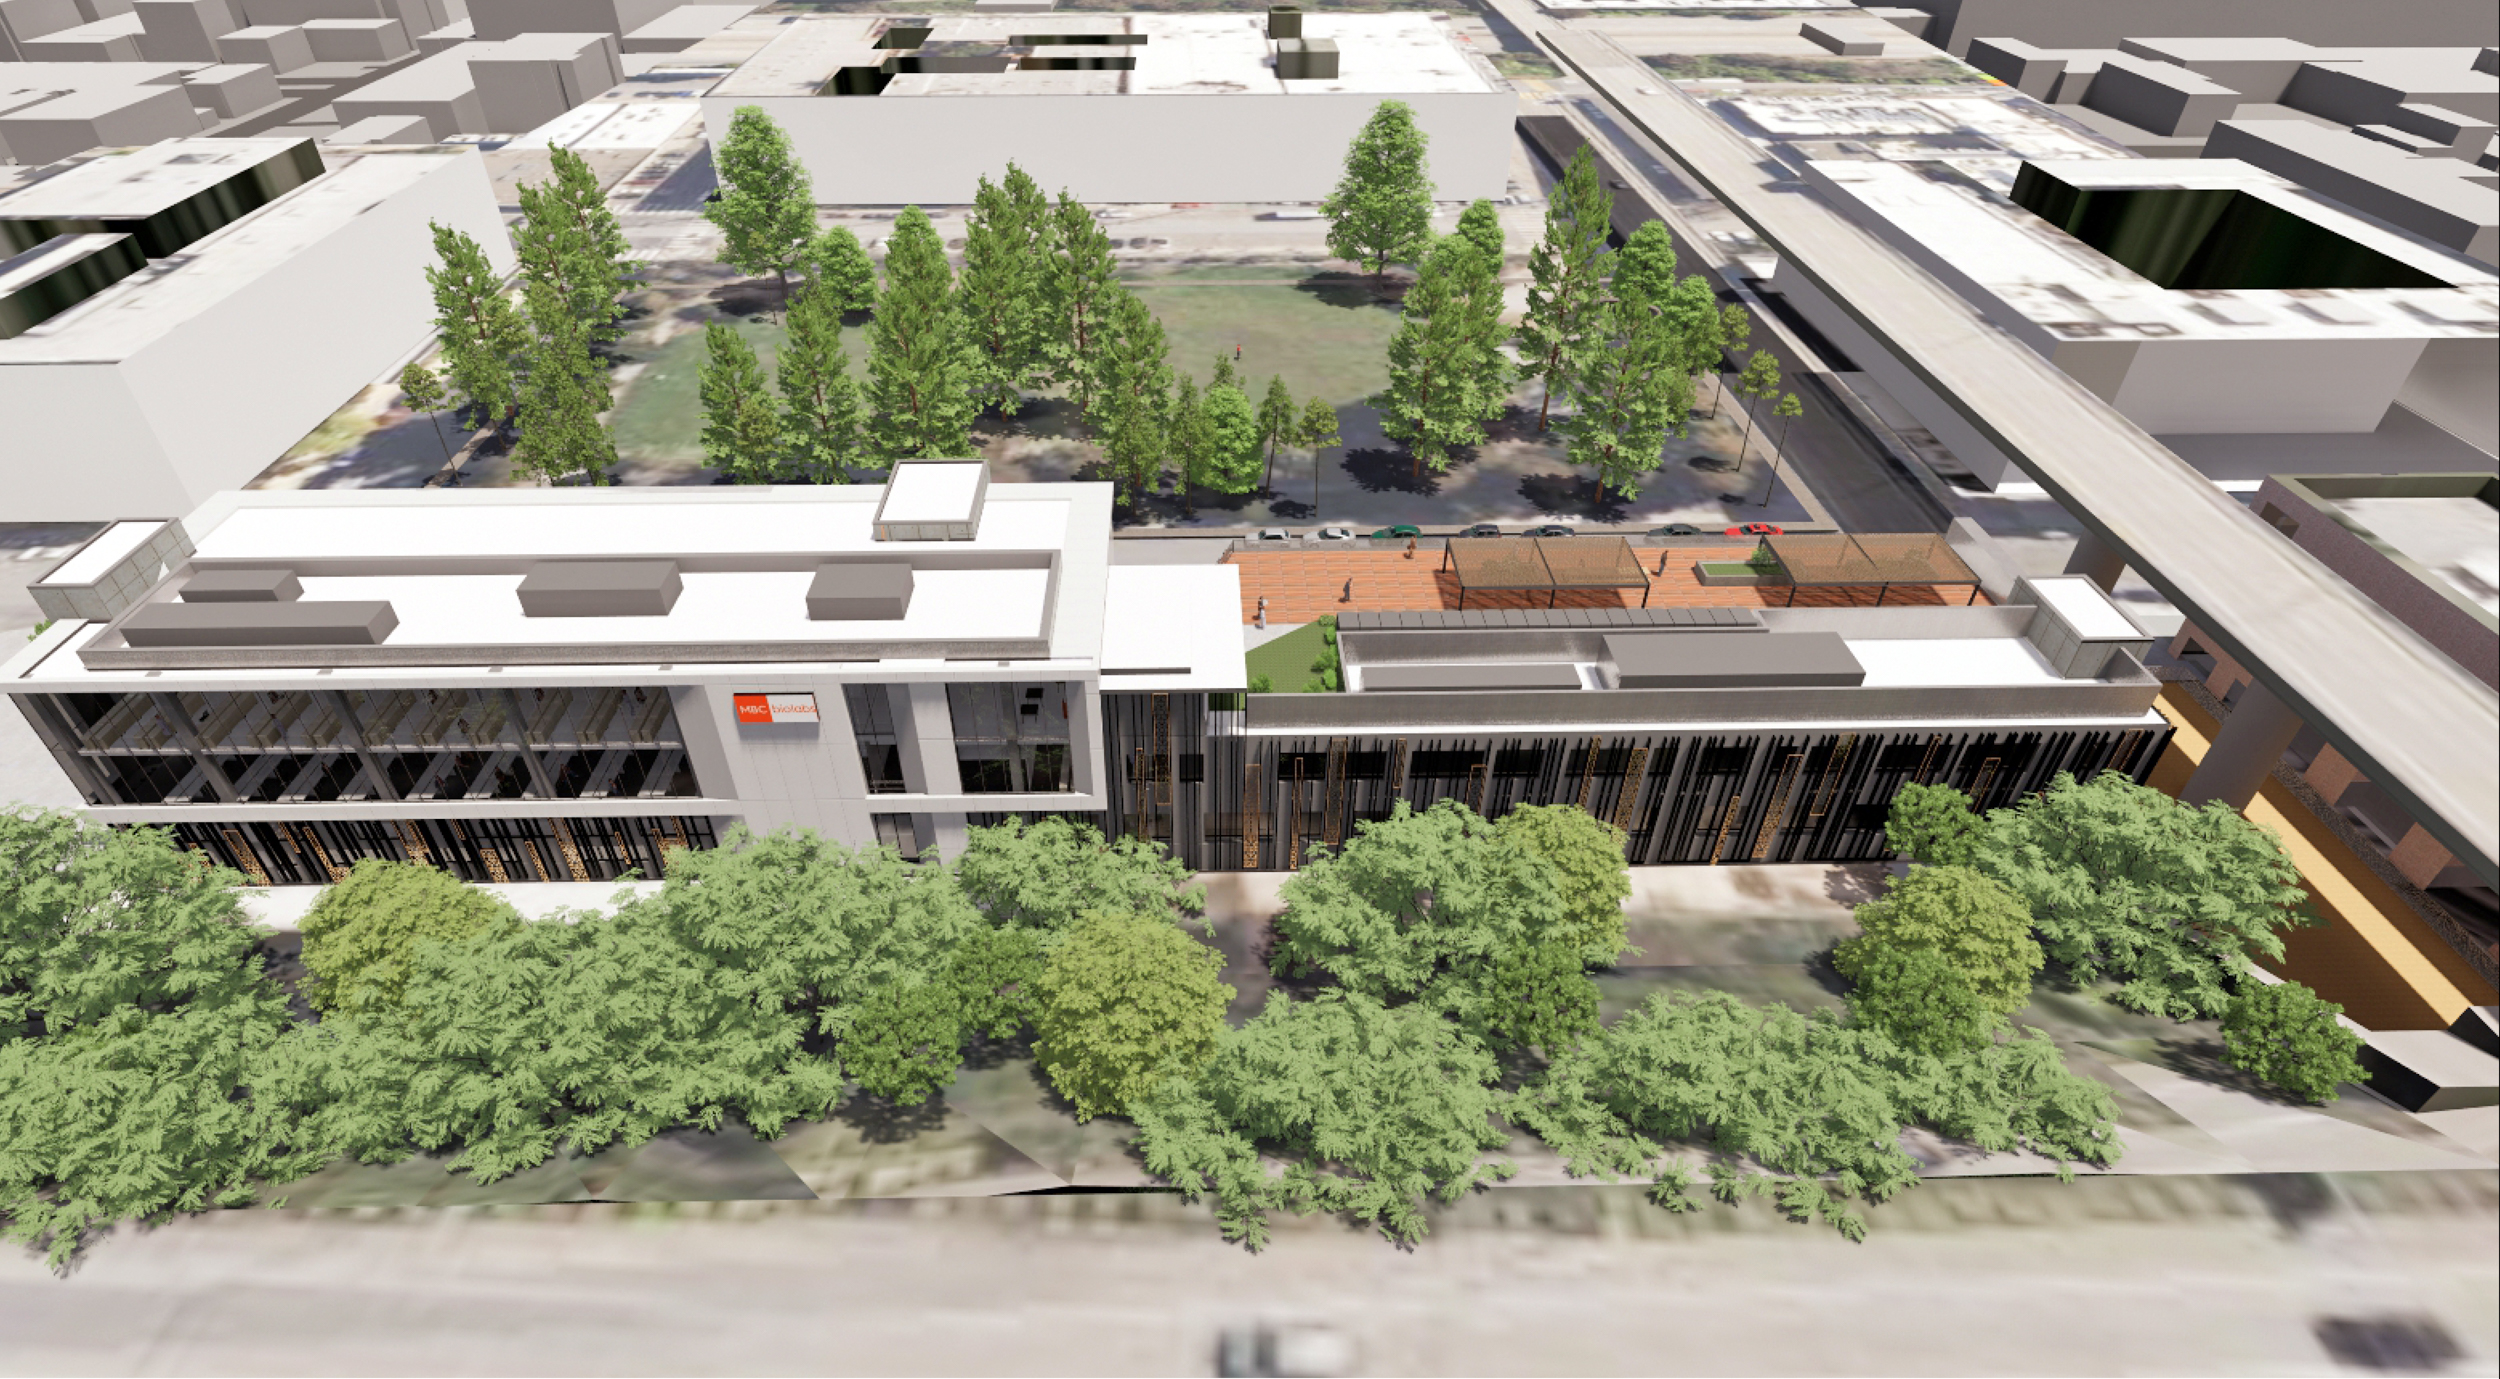 700 Indiana Street aerial view from above I 280, rendering by MBH Architects